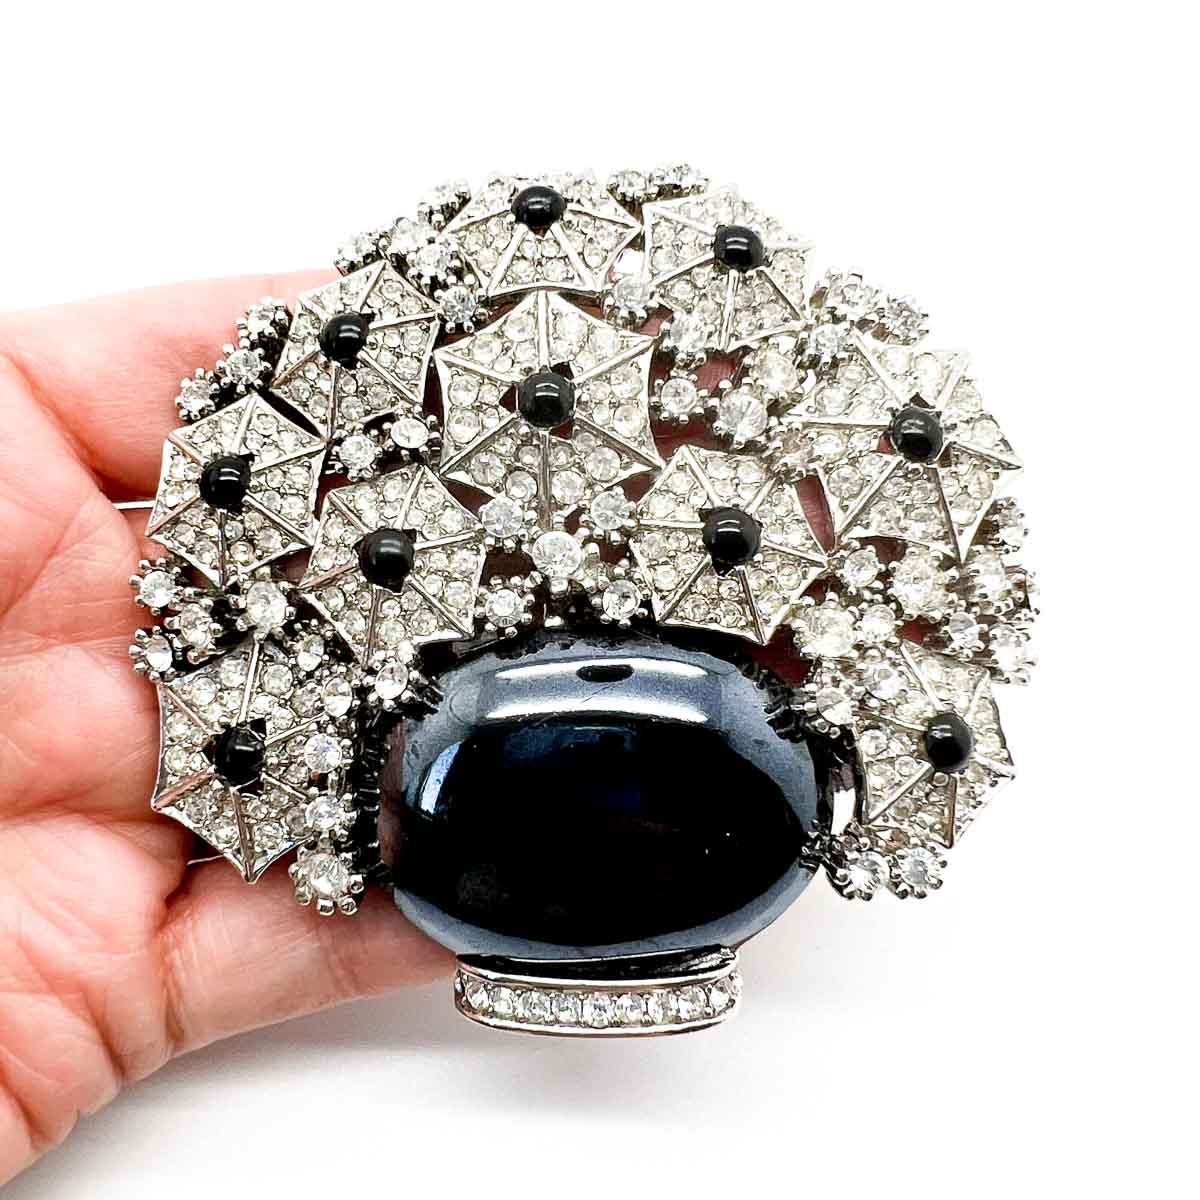 A spectacular Vintage Cristobal Giardinetti Brooch. By London Jeweller Cristobal. Featuring a large pot of stylised flowers in a ultra eye-catching art deco design and monochrome colour-way. This one is pure lapel joy.

Vintage Condition: Very good